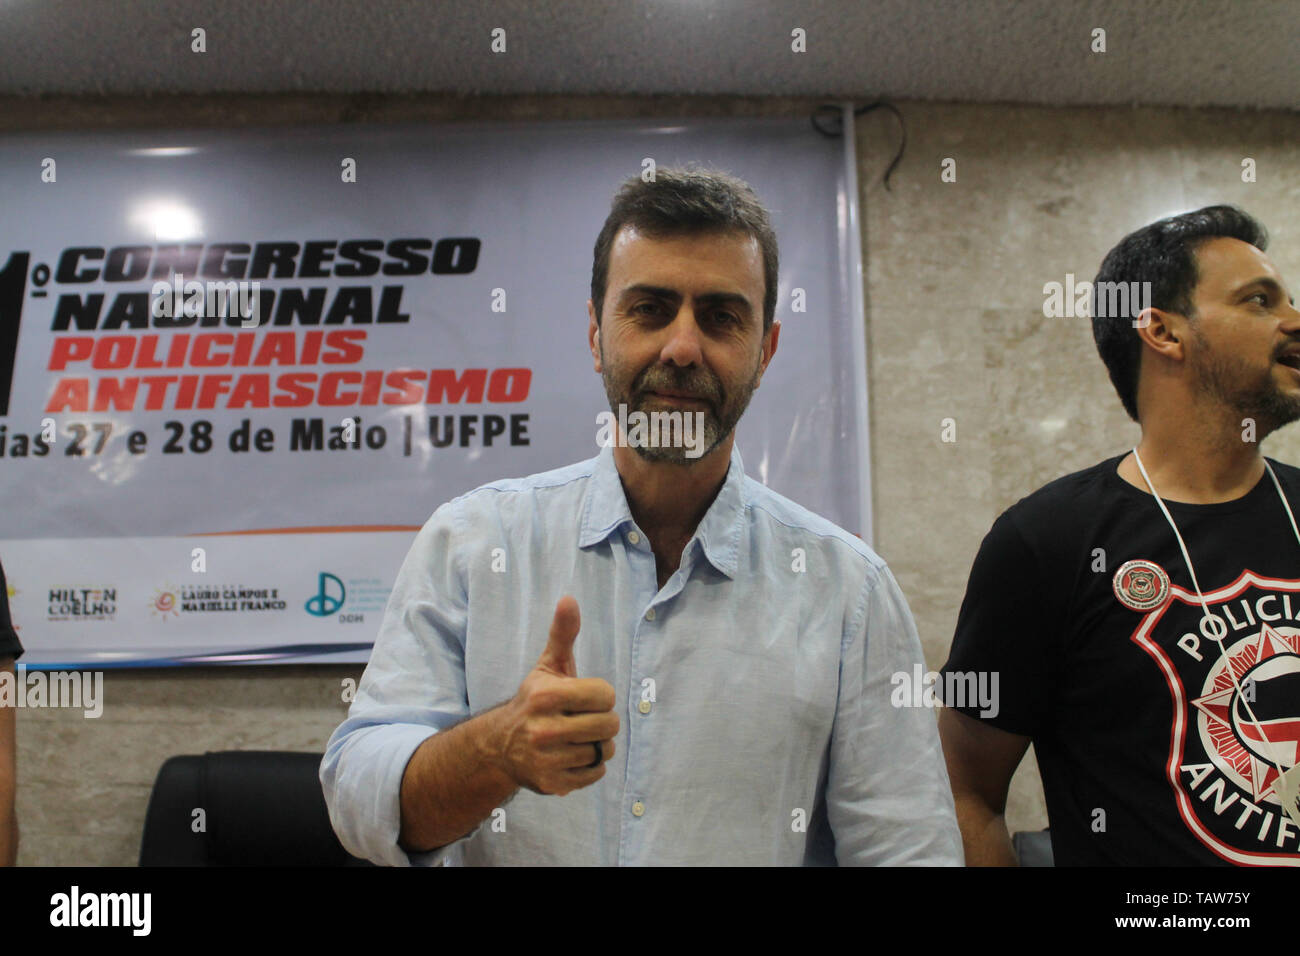 RECIFE, PE - 27.05.2019: NATIONAL CONGRESS ANTIFASCISM POLICE - Federal Deputy, Marcelo Freixo (PSOL-RJ), participated in the &quot;1st National Antifascism Police Congress&quot; in the auditorium of the Center for Aed Social Sciences of the Fee Federal University of Pernambuco (UFPEidade Univeriversitária, West Zone of Recife. The Congress has as its theme: &quhe politicitical challenges for the construction of a democratic public security policy for Brazil&quot;. Also participating in the congress, the Federal Deputy, Maria do RosárPT-RS) and the former presidential candidatedate Ciro Gomes. Stock Photo